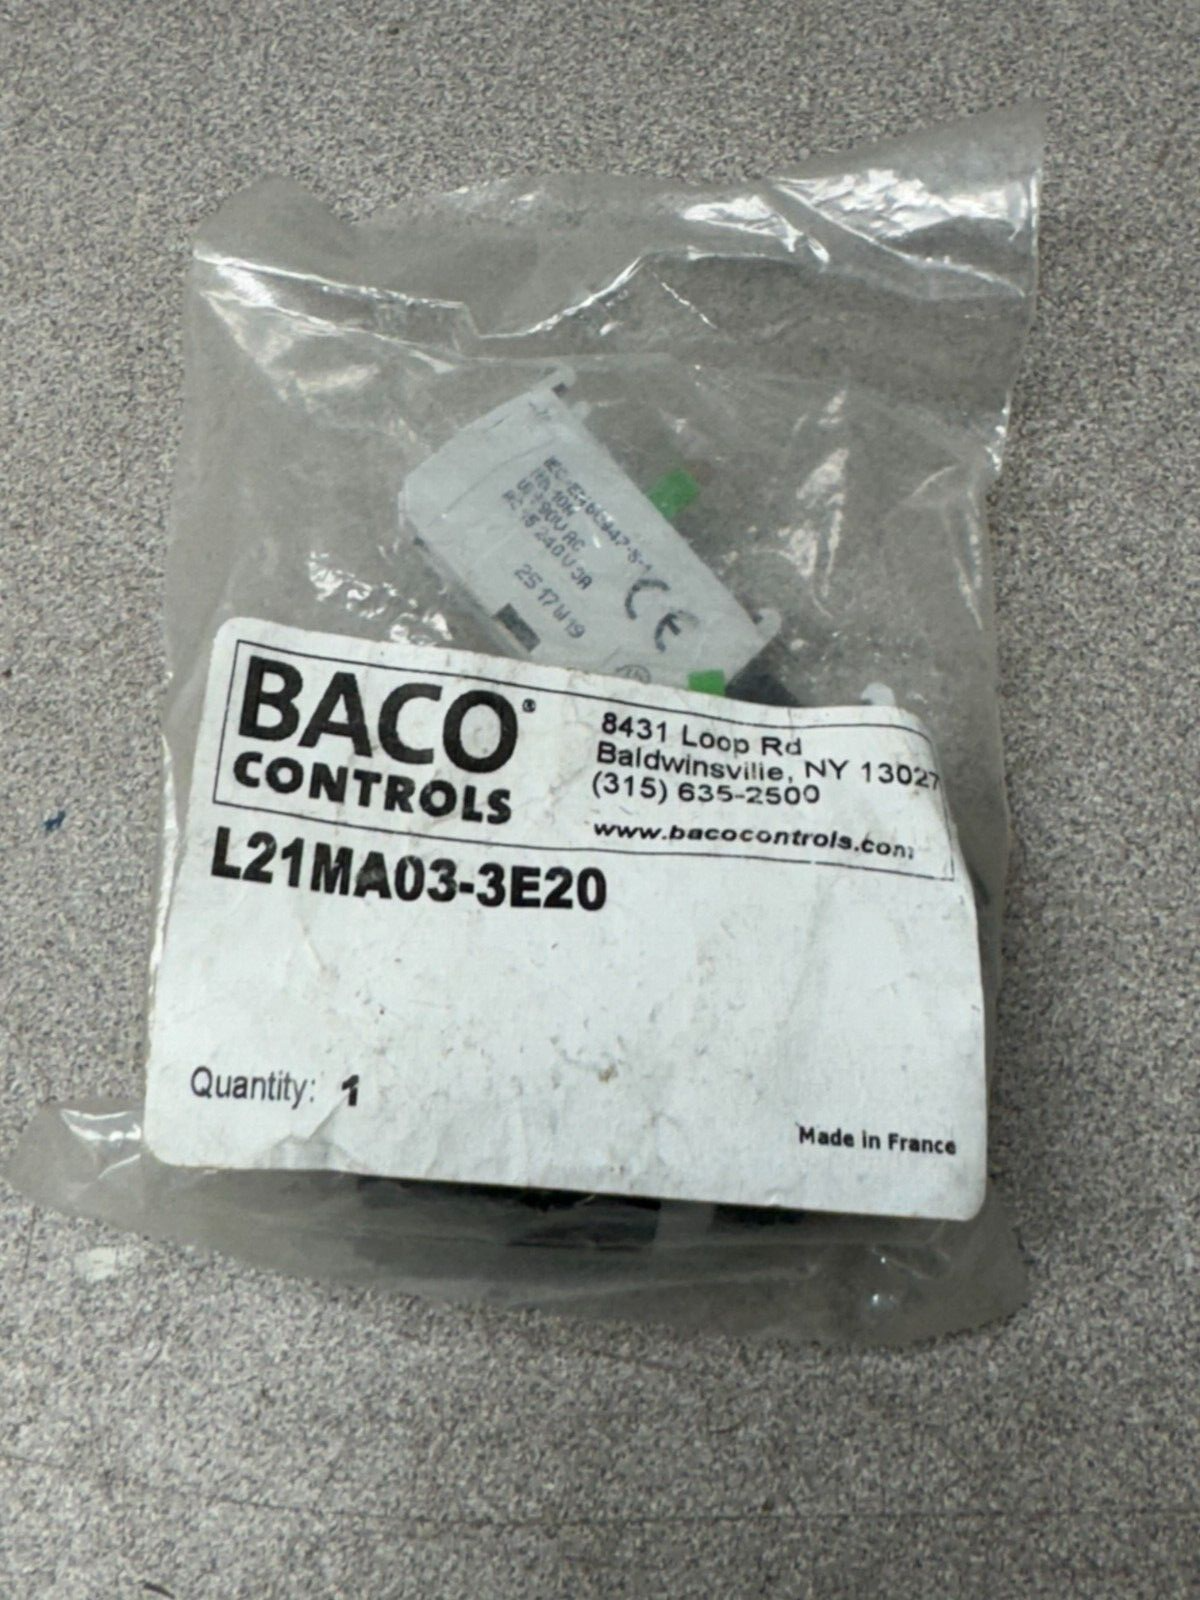 NEW IN PACKAGE BACO CONTROLS SELECTOR SWITCH L21MA03-3E20